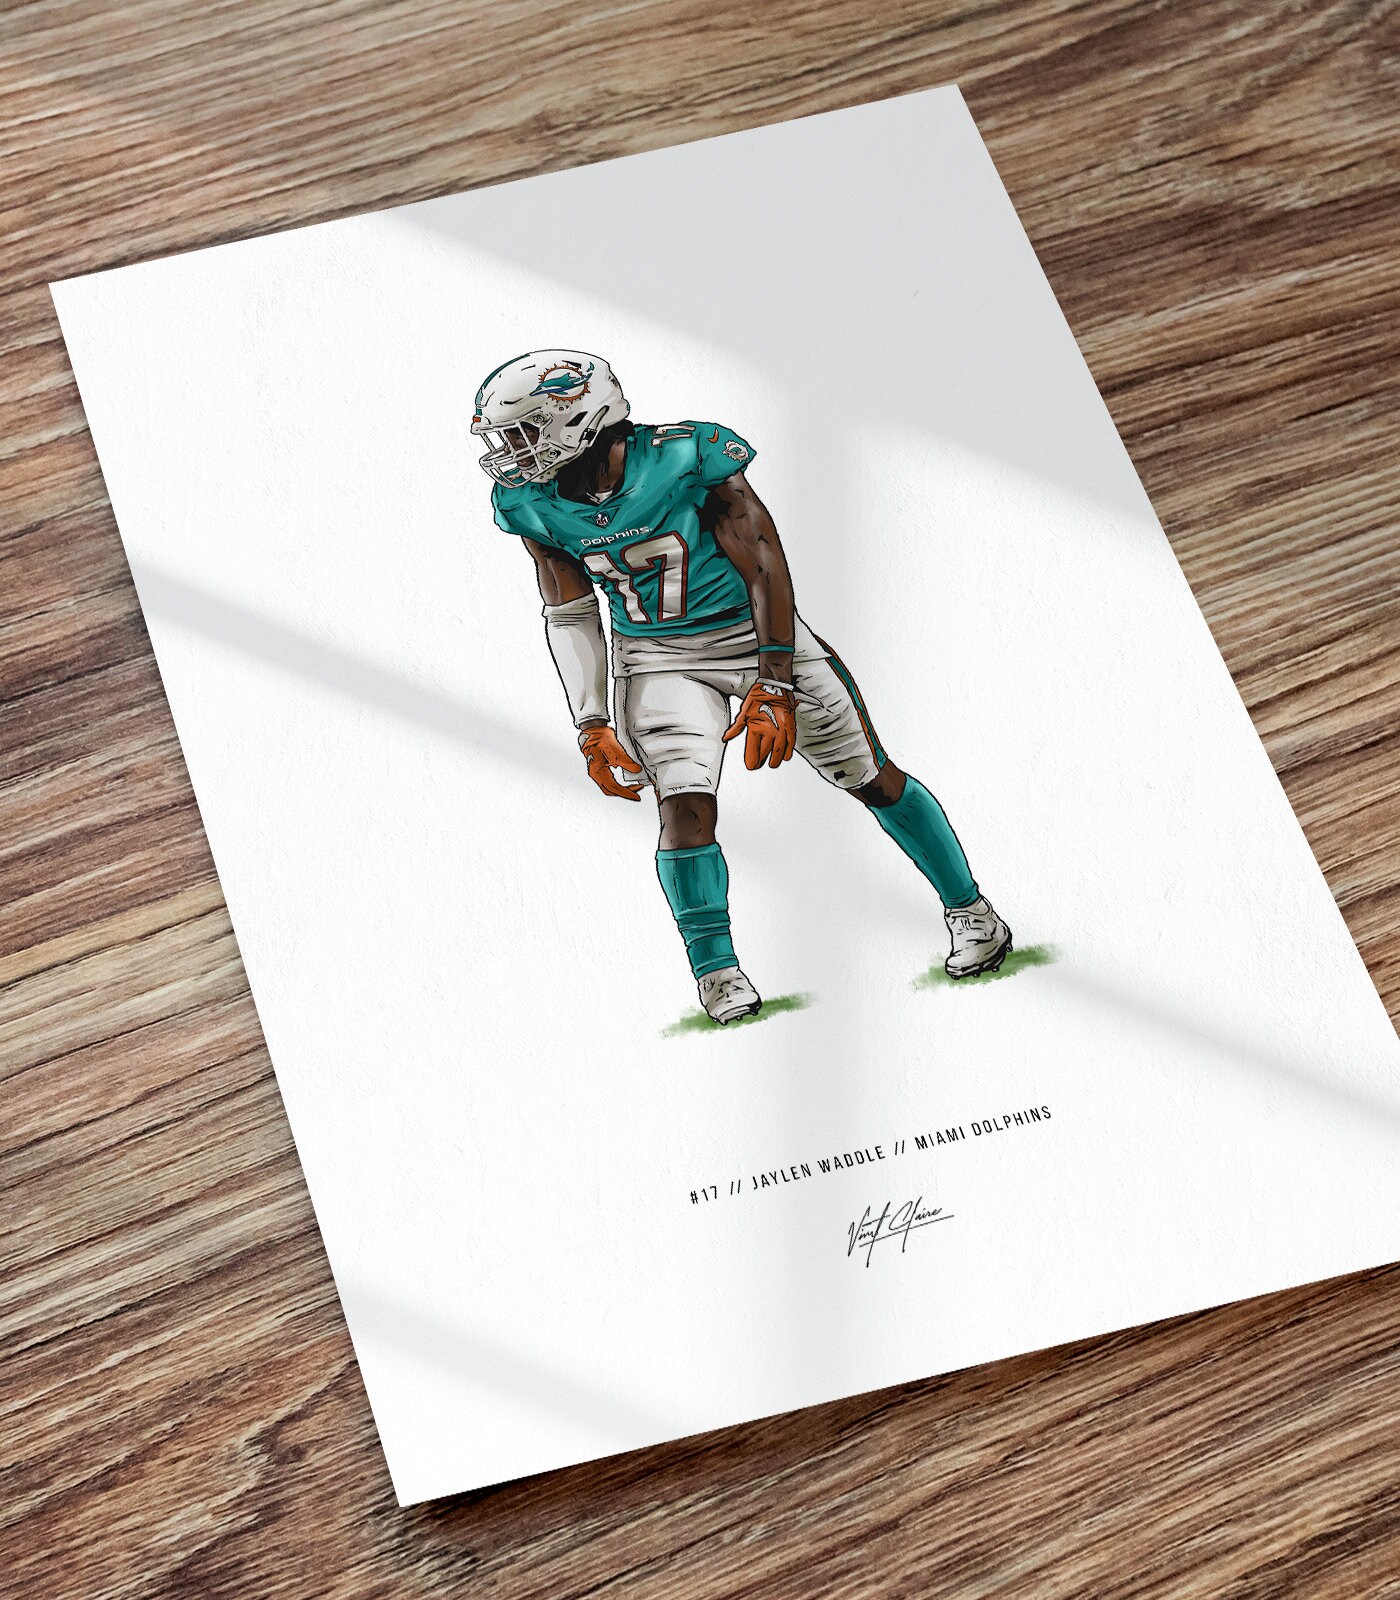 Jaylen Waddle Miami Dolphins Football Illustrated Art Poster, Jaylen Waddle Poster, Gift for Miami Dolphins Fans